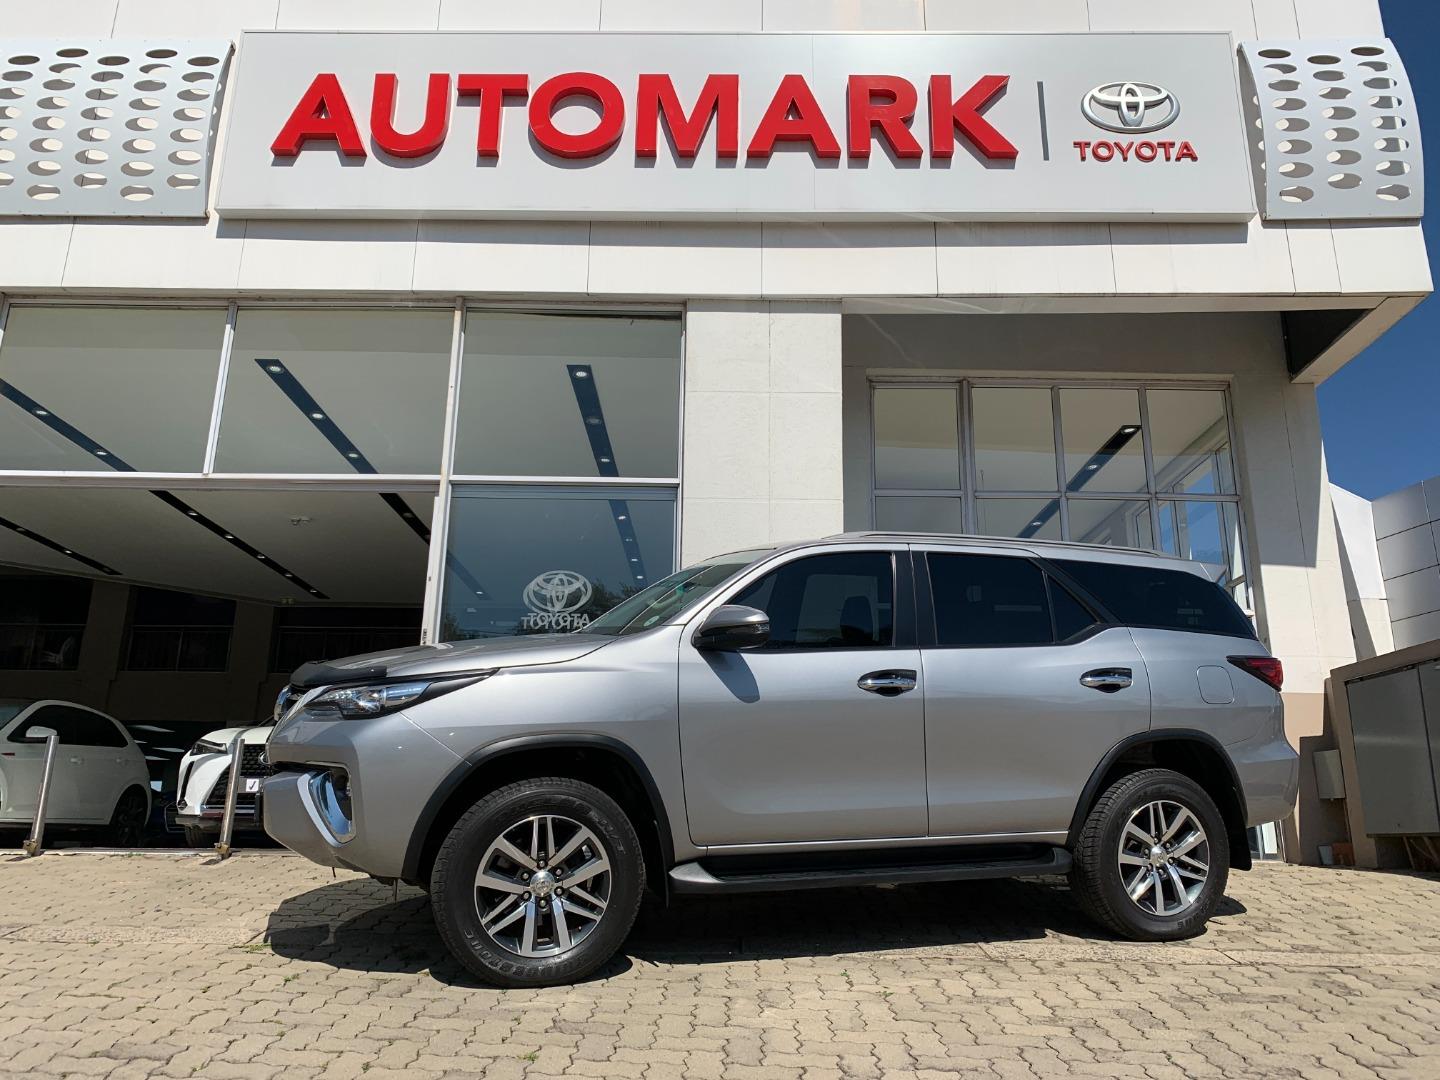 2019 Toyota Fortuner Sc 2.8 Gd-6 Raised bodytype At for sale - 341009